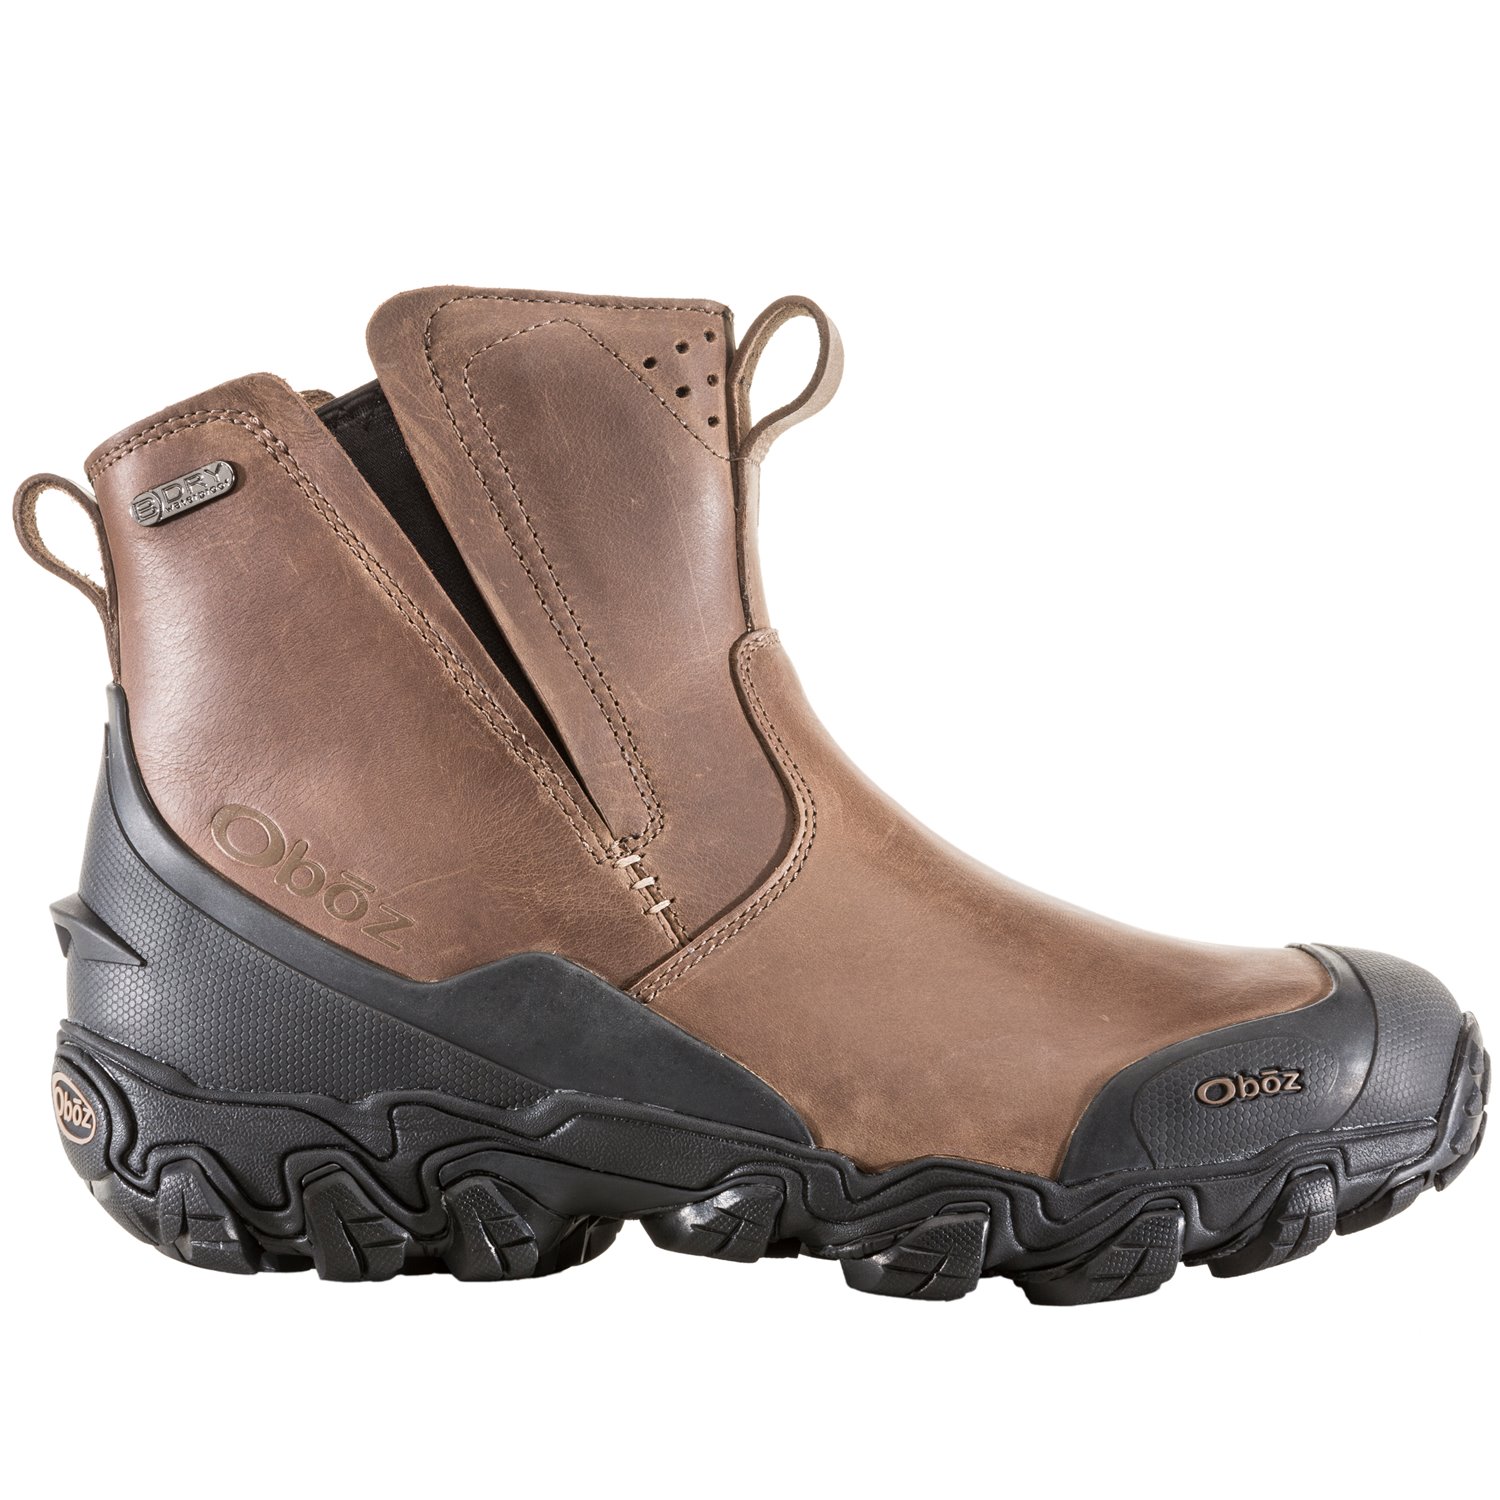 waterproof insulated pull on boots